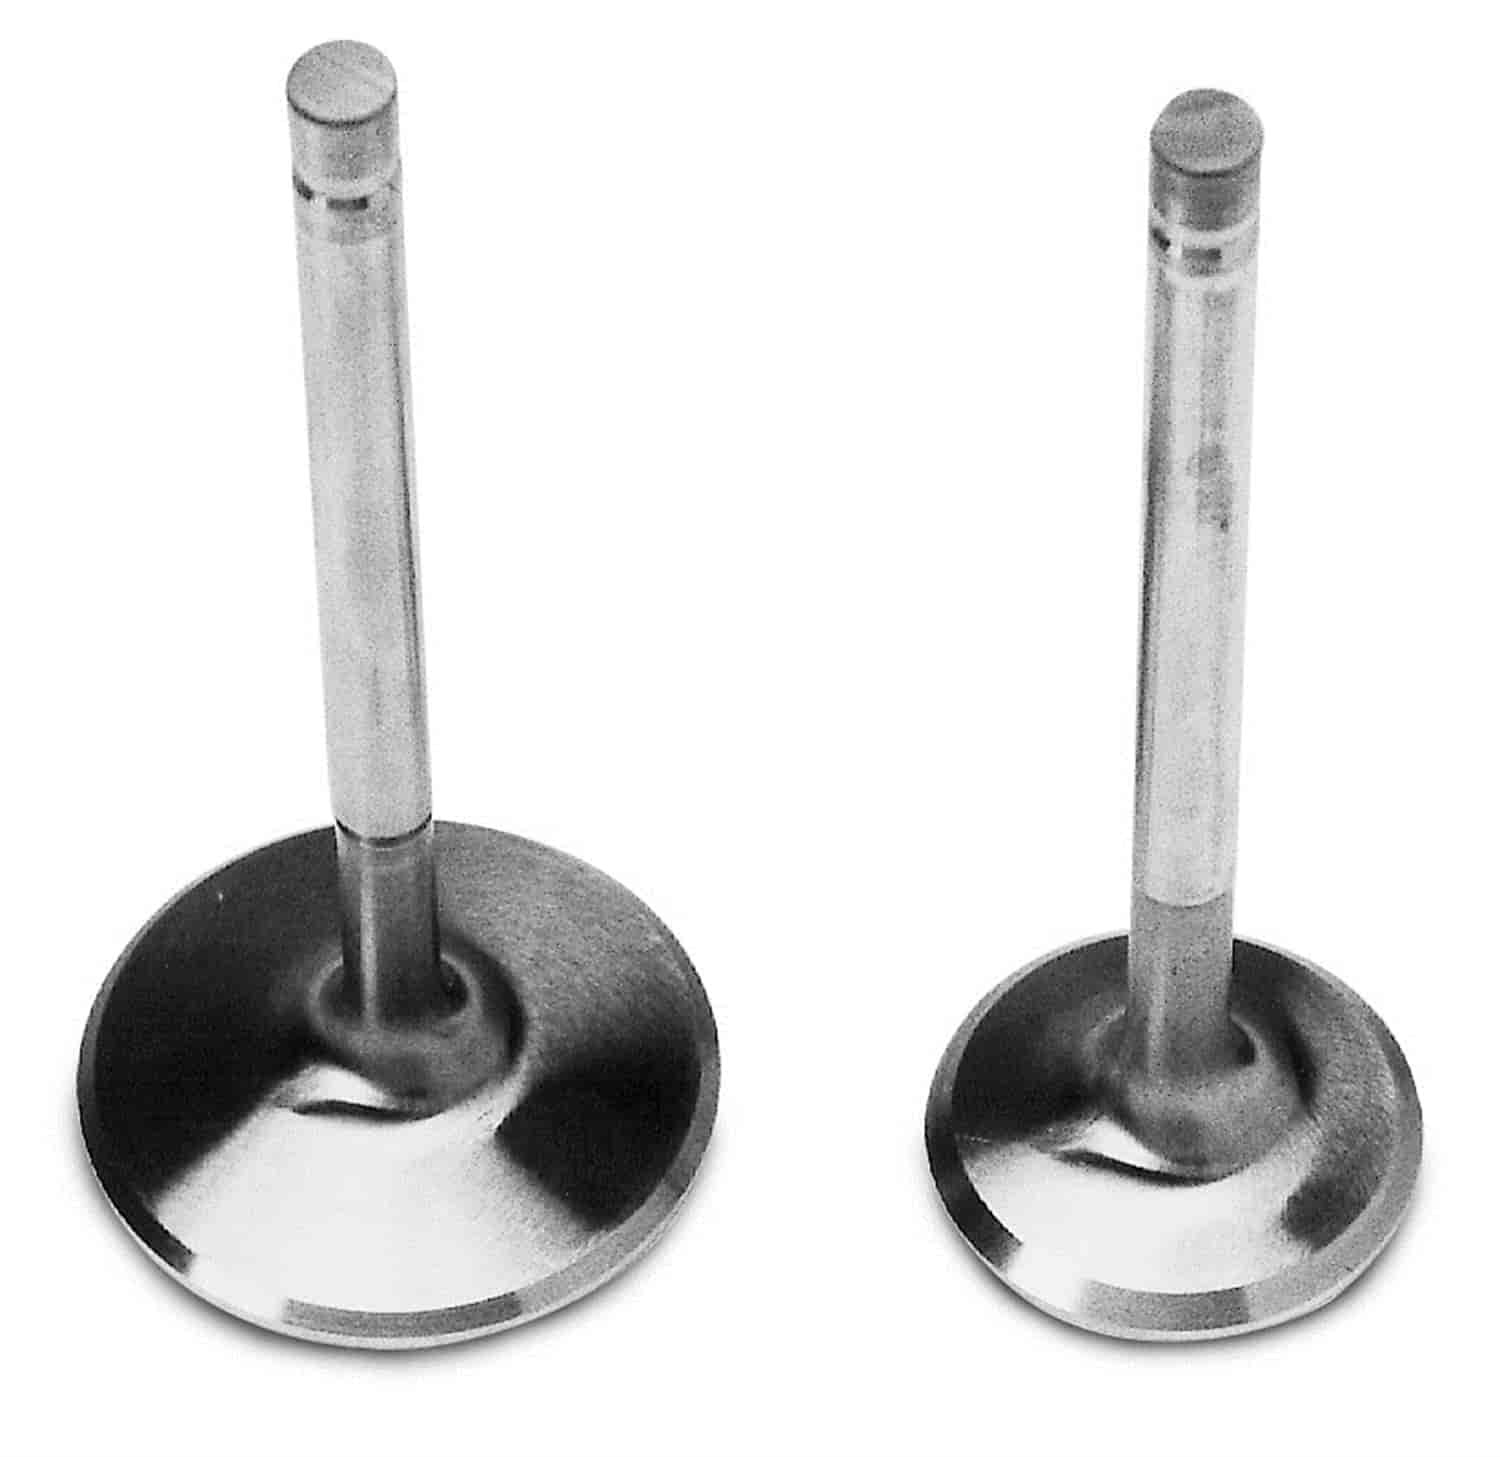 Single Exhaust Valve 1.60" for Small Block Ford Performer #350-60379 & 350-60399